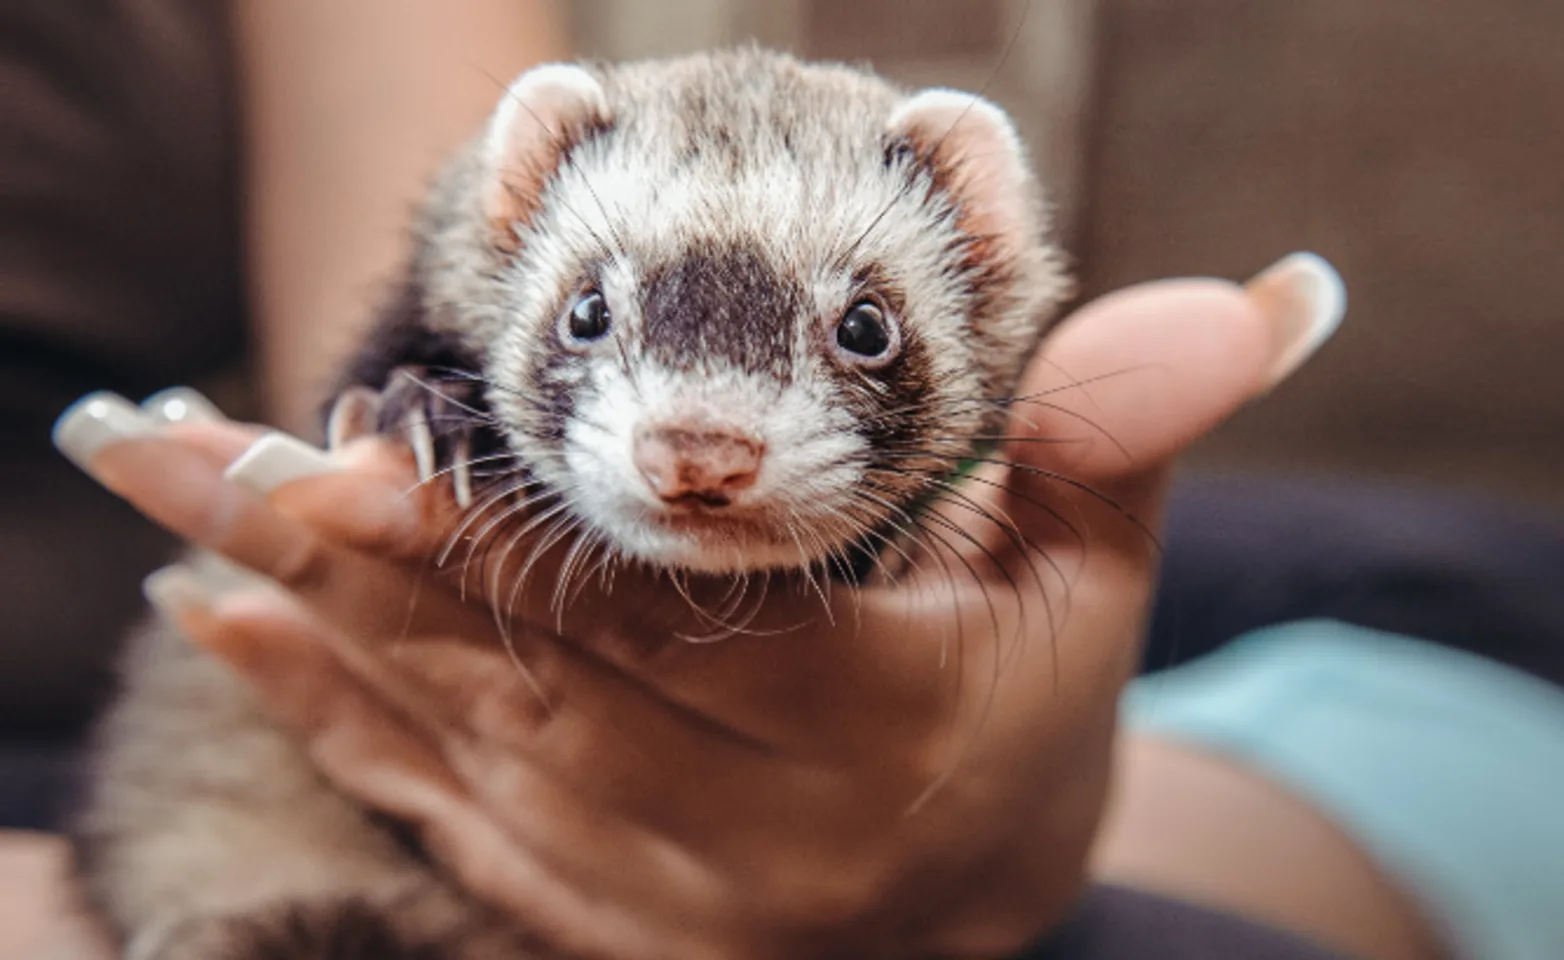 Owner Holding a Baby Ferret